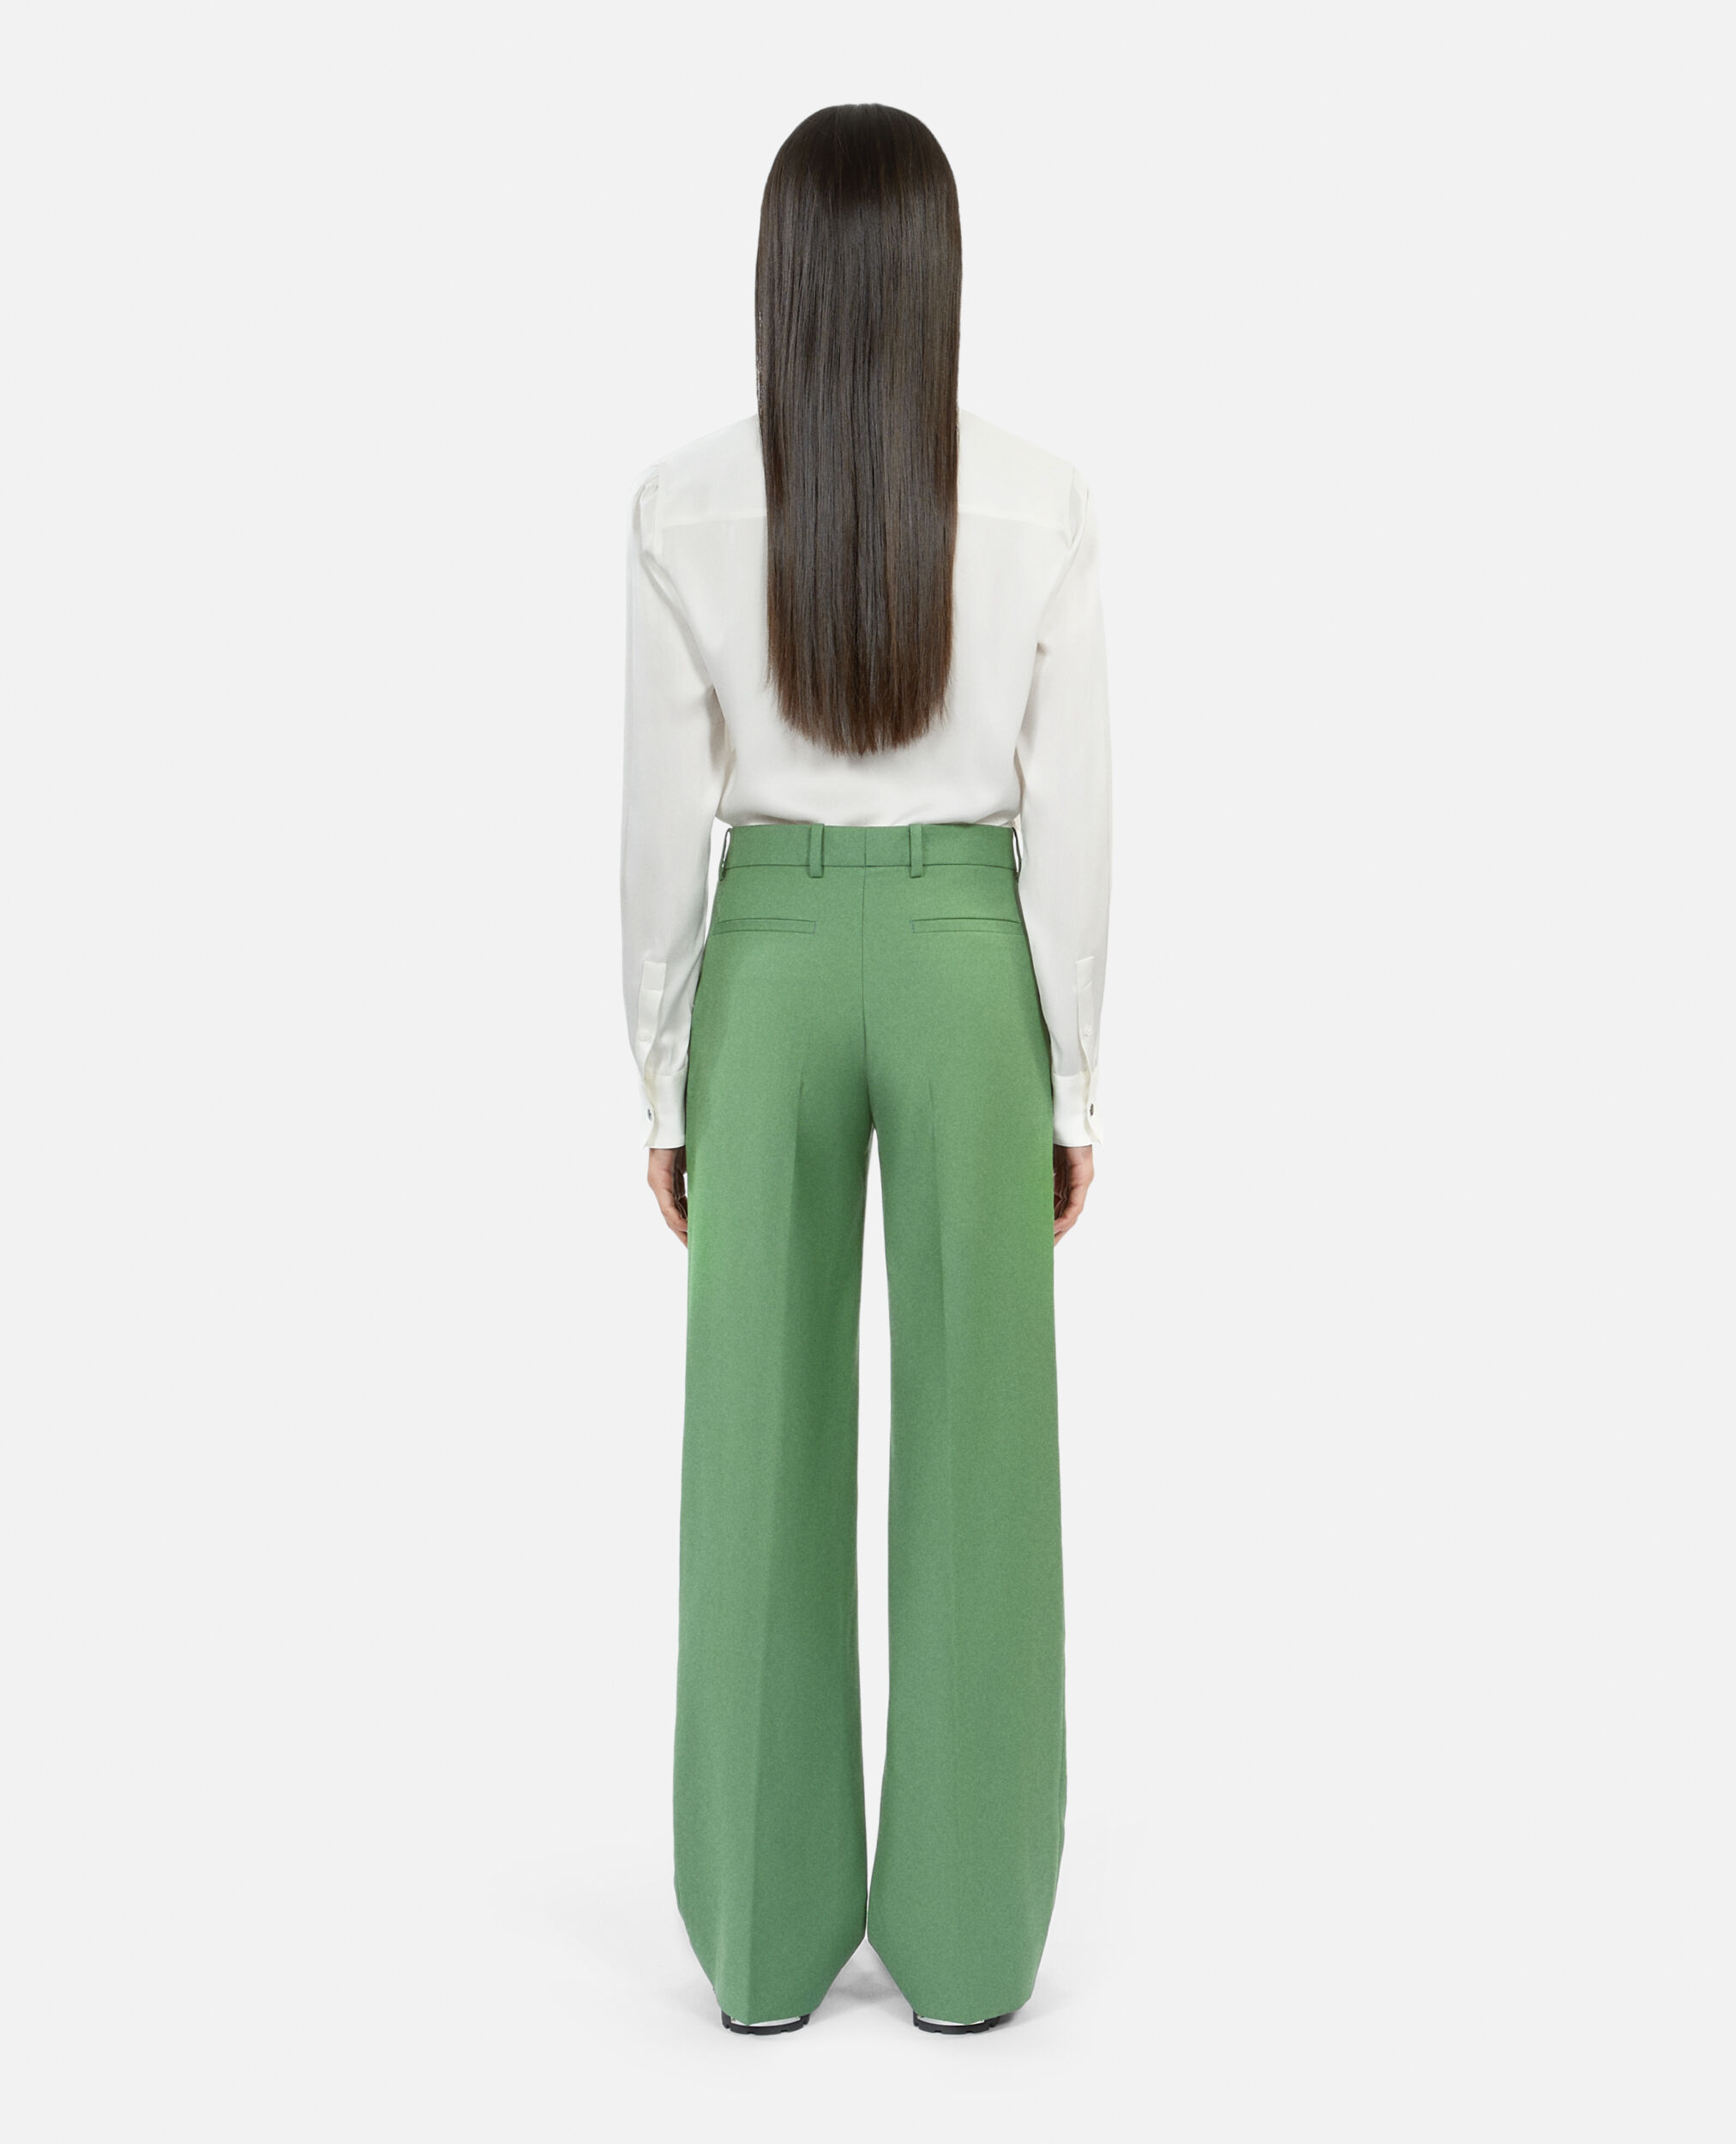 Green wool suit trousers, LIGHT KAKI, hi-res image number null